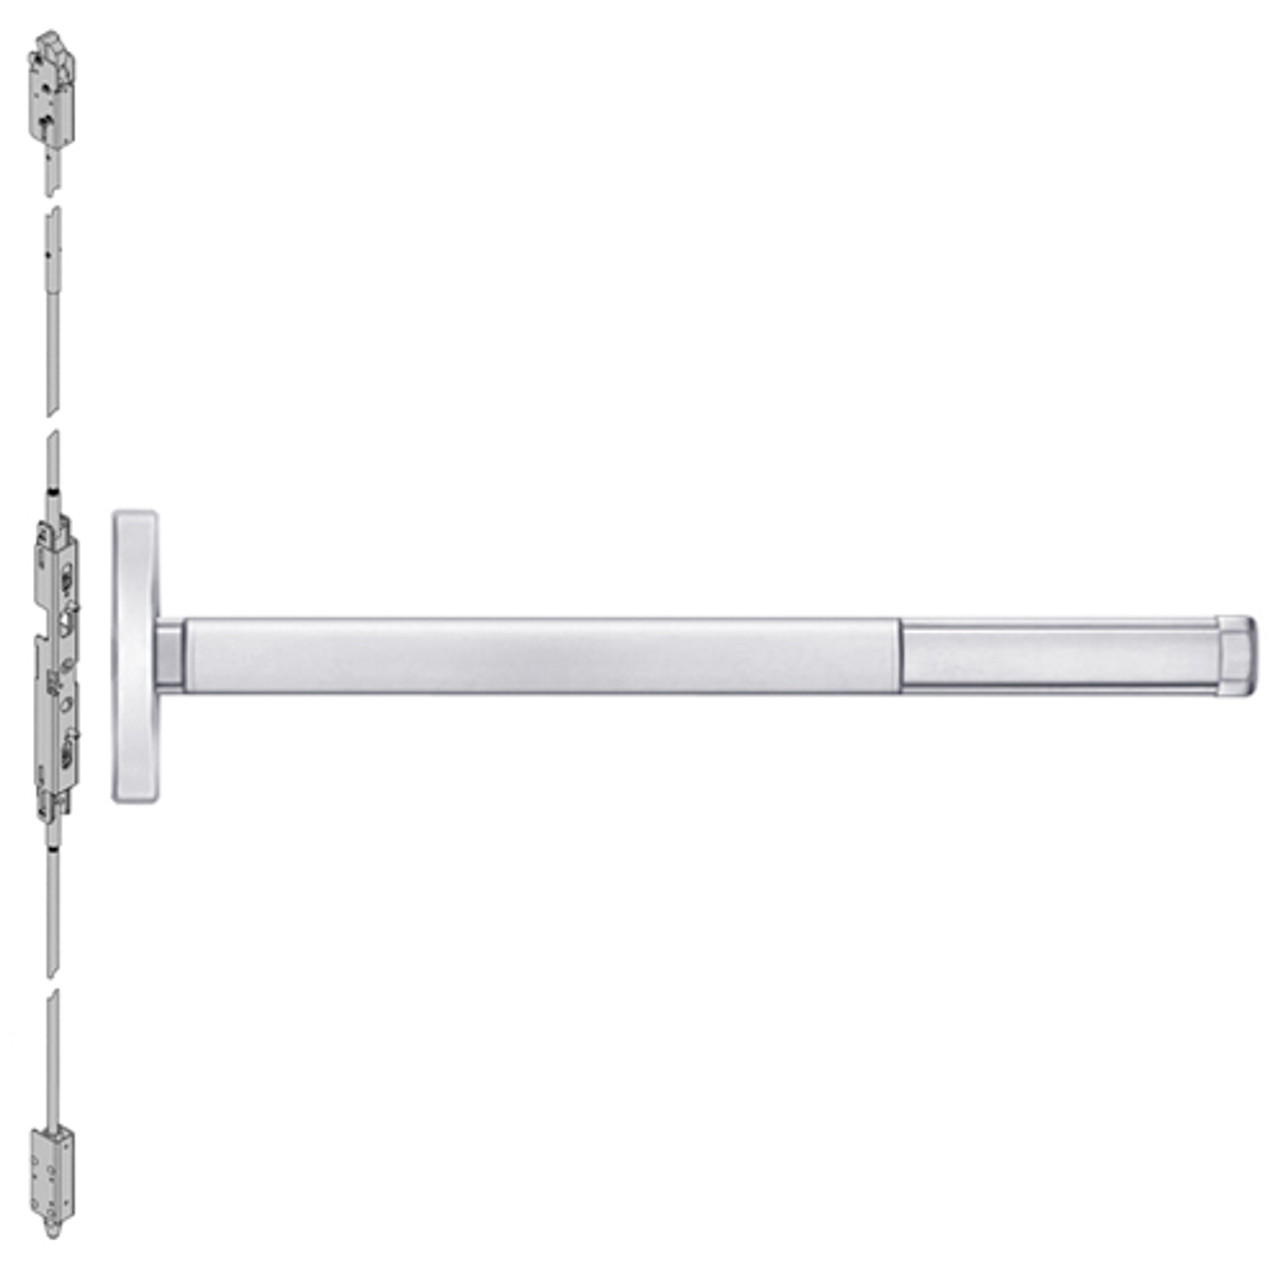 DE2603LBR-625-36 PHI 2600 Series Concealed Vertical Rod Exit Device with Delayed Egress Prepped for Key Retracts Latchbolt in Bright Chrome Finish